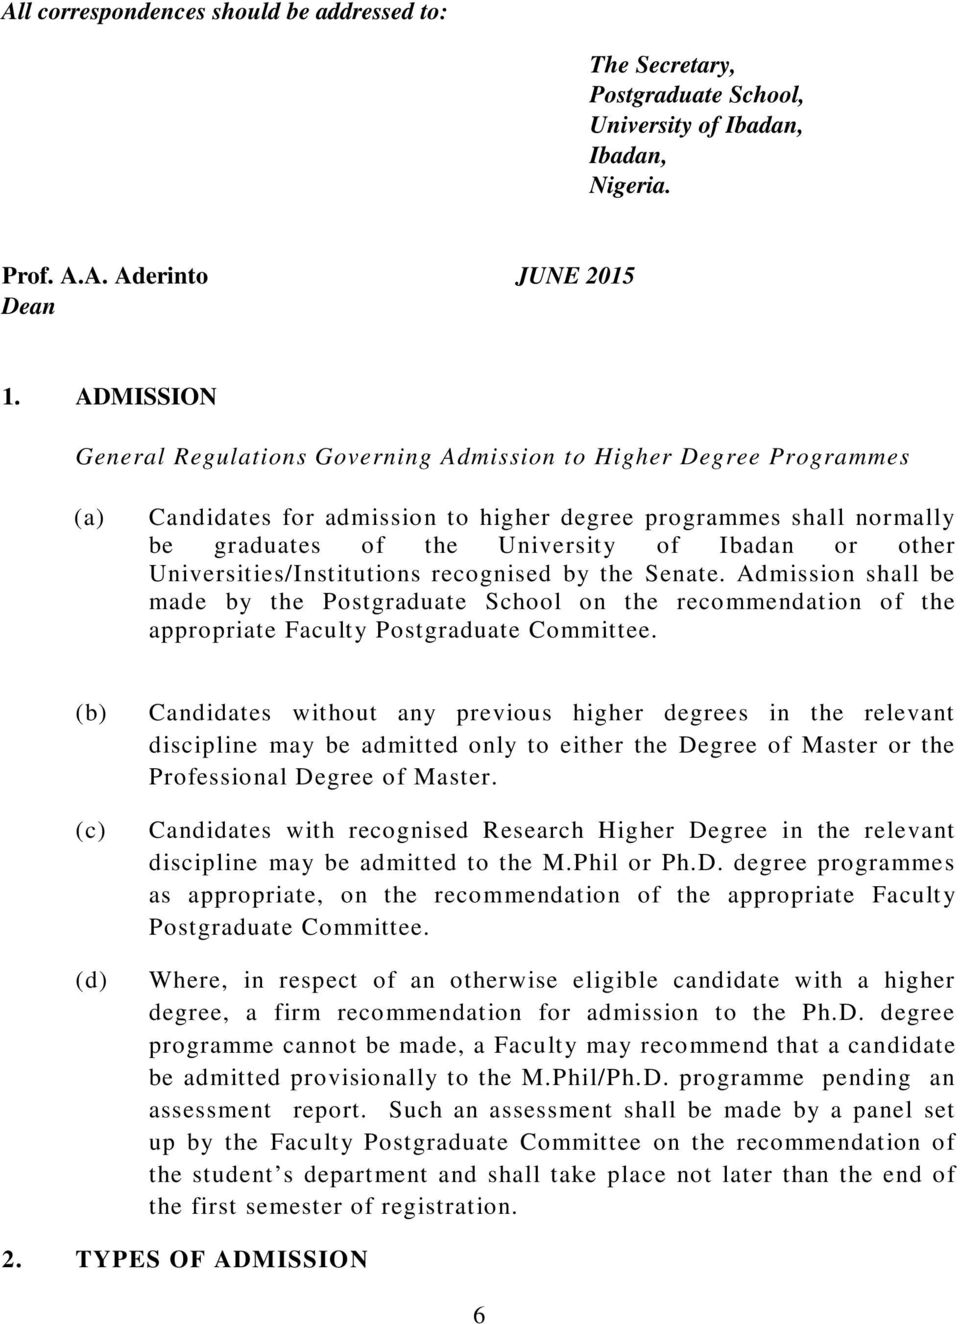 Sample Recommendation Letter For Scholarship From Professor within proportions 960 X 1324